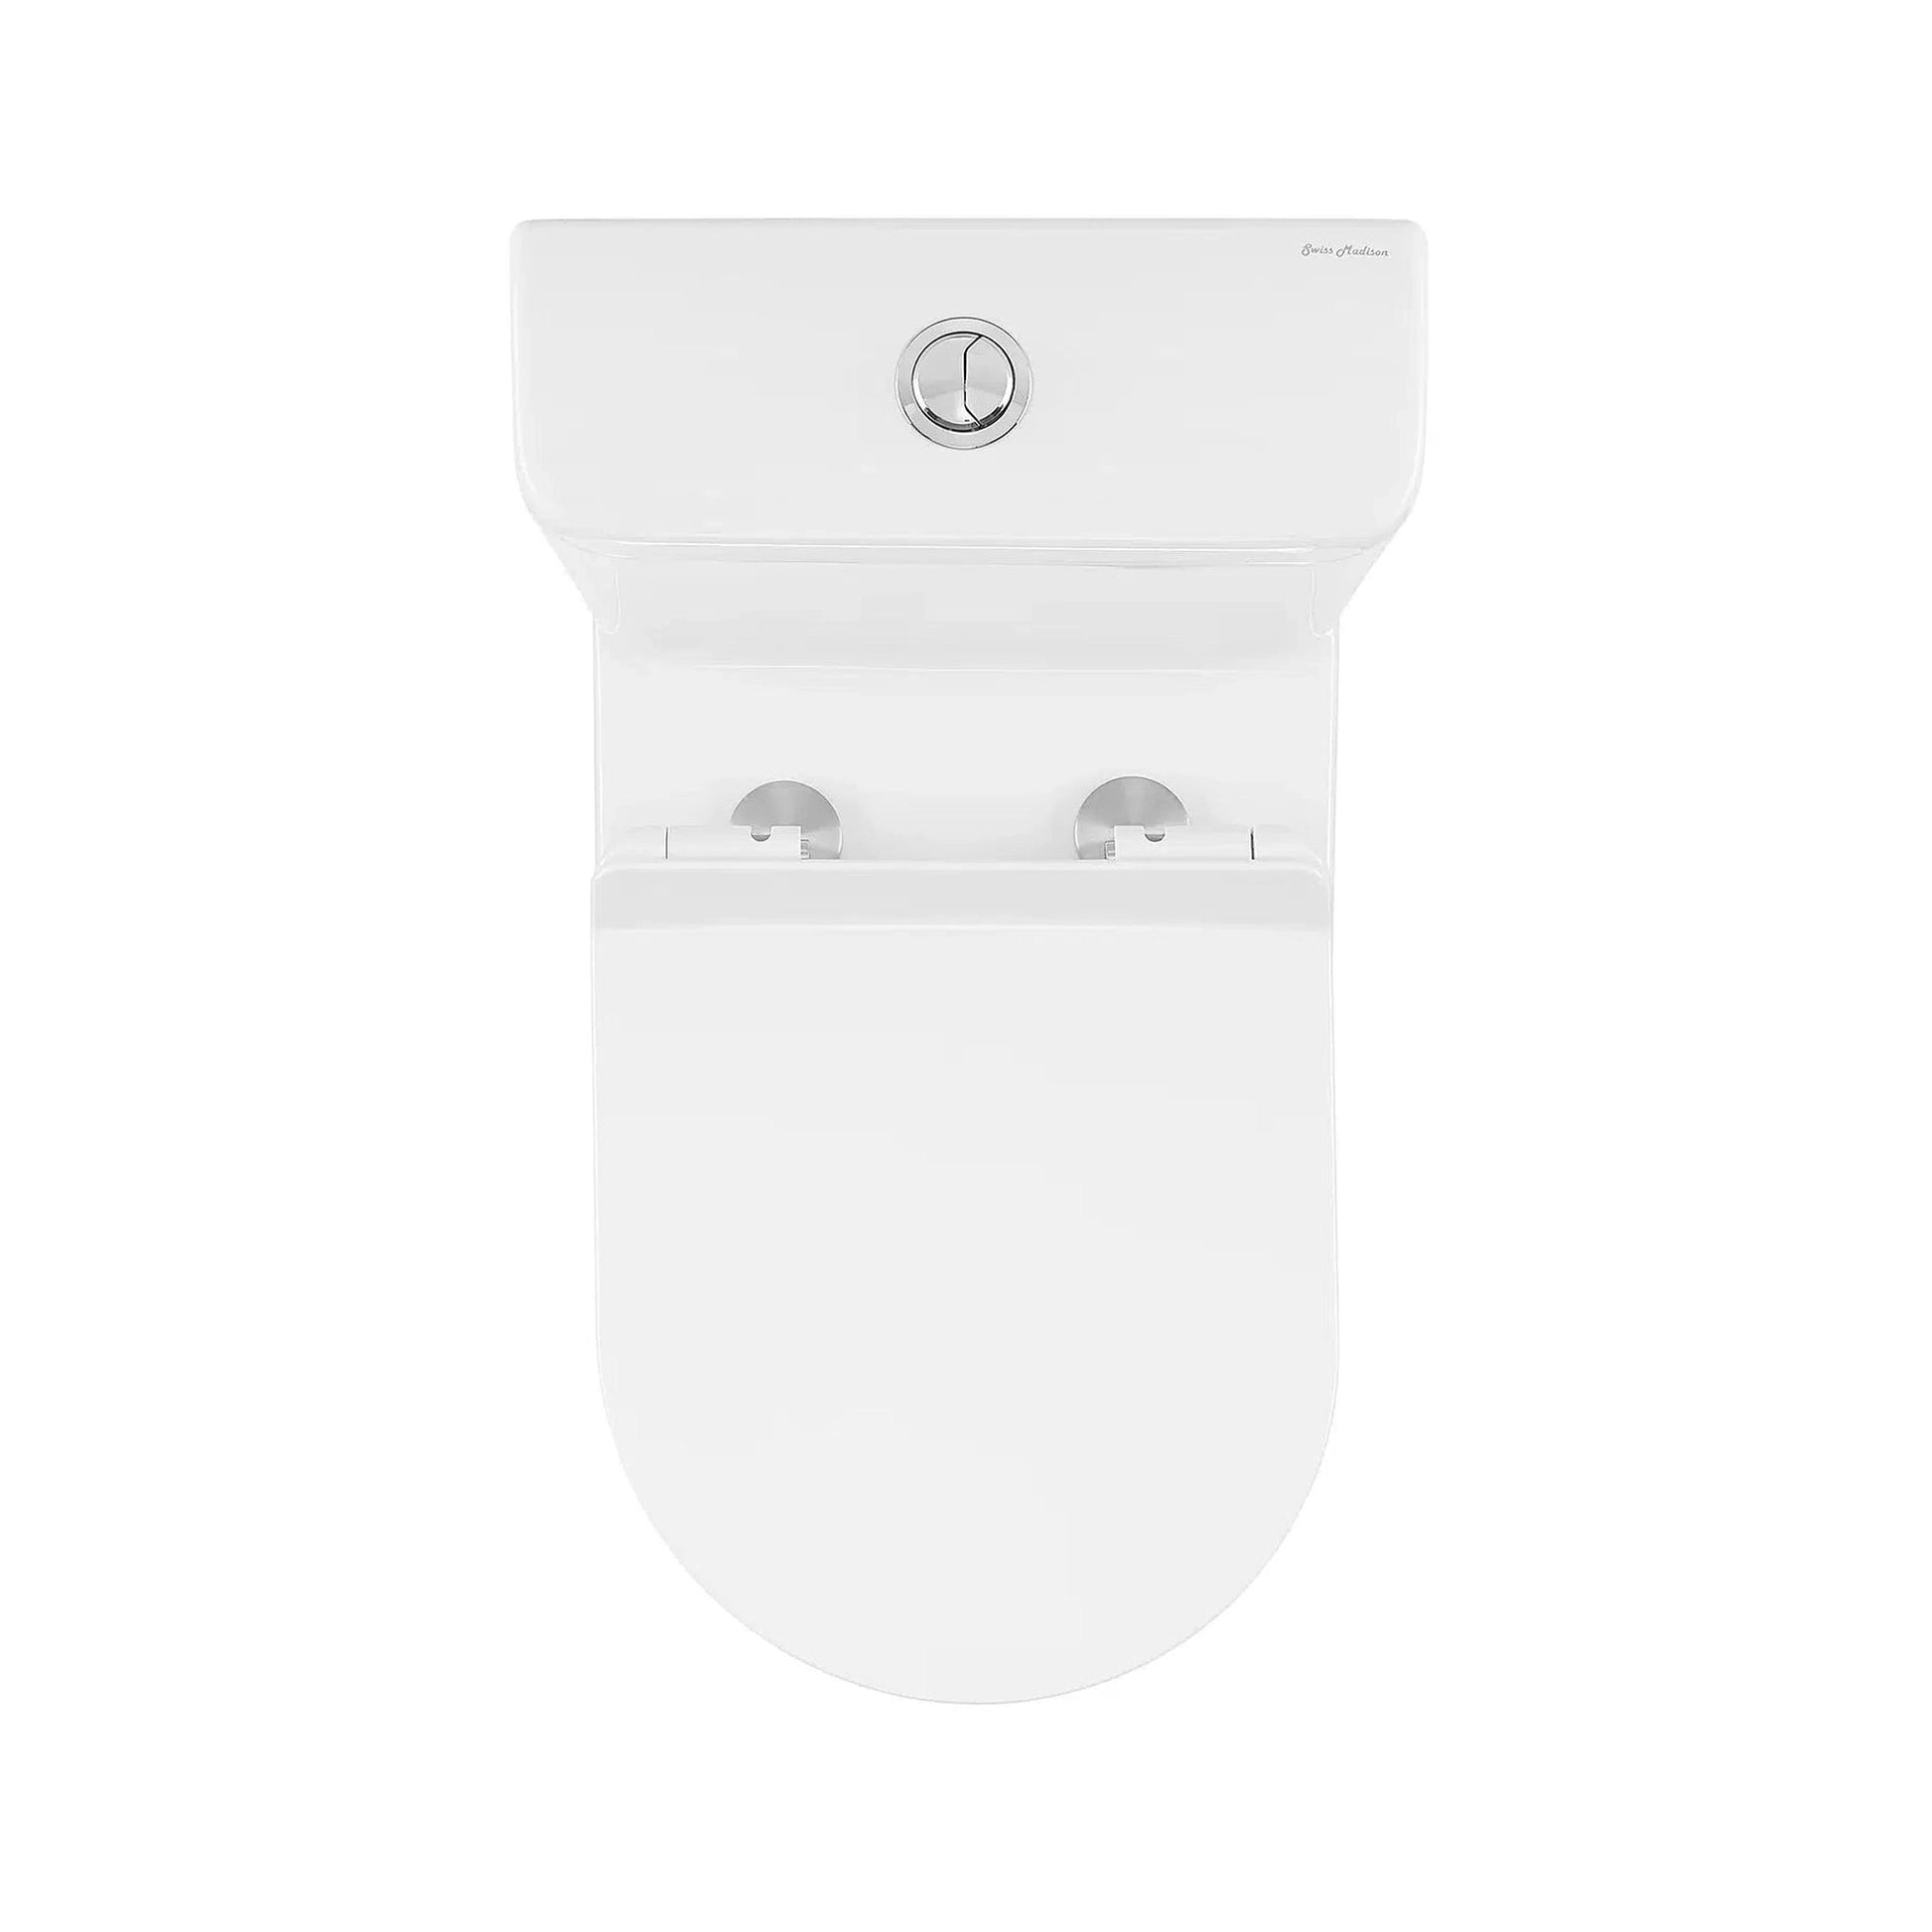 Swiss Madison Calice 15" x 33" Two-Piece Glossy White Elongated Floor-Mounted Toilet With Rear Outlet and 0.8/1.28 GPF